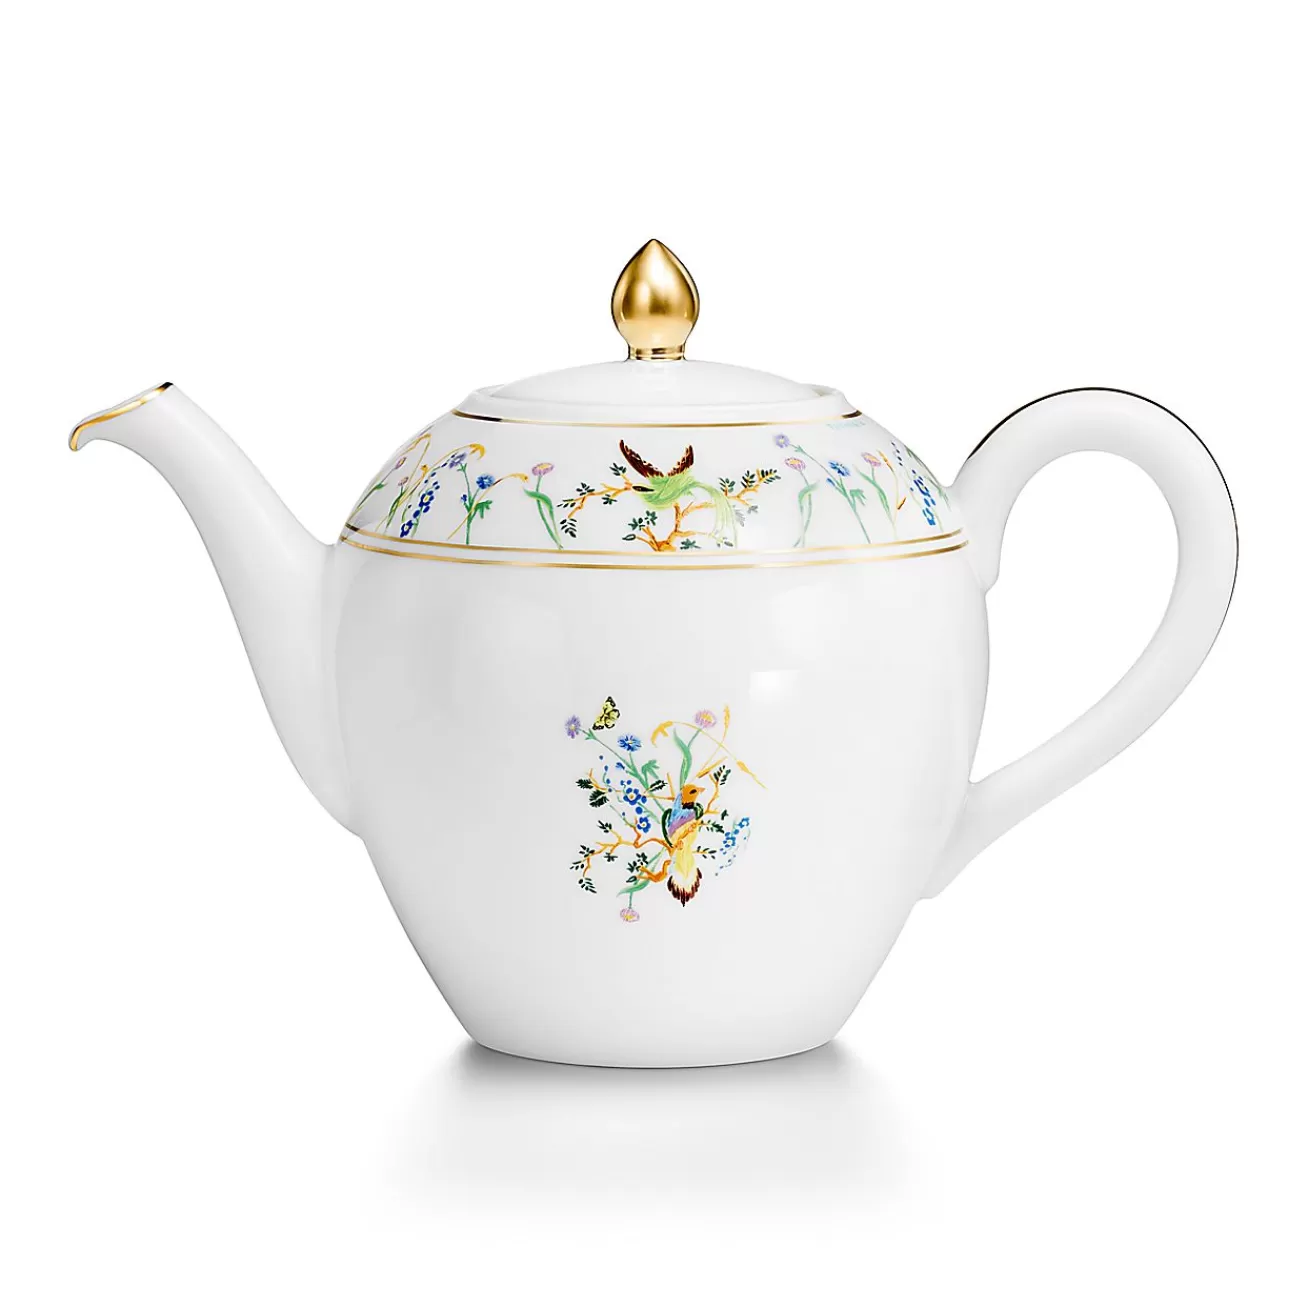 Tiffany & Co. Tiffany Jardin Teapot in Porcelain | ^ The Home | Housewarming Gifts